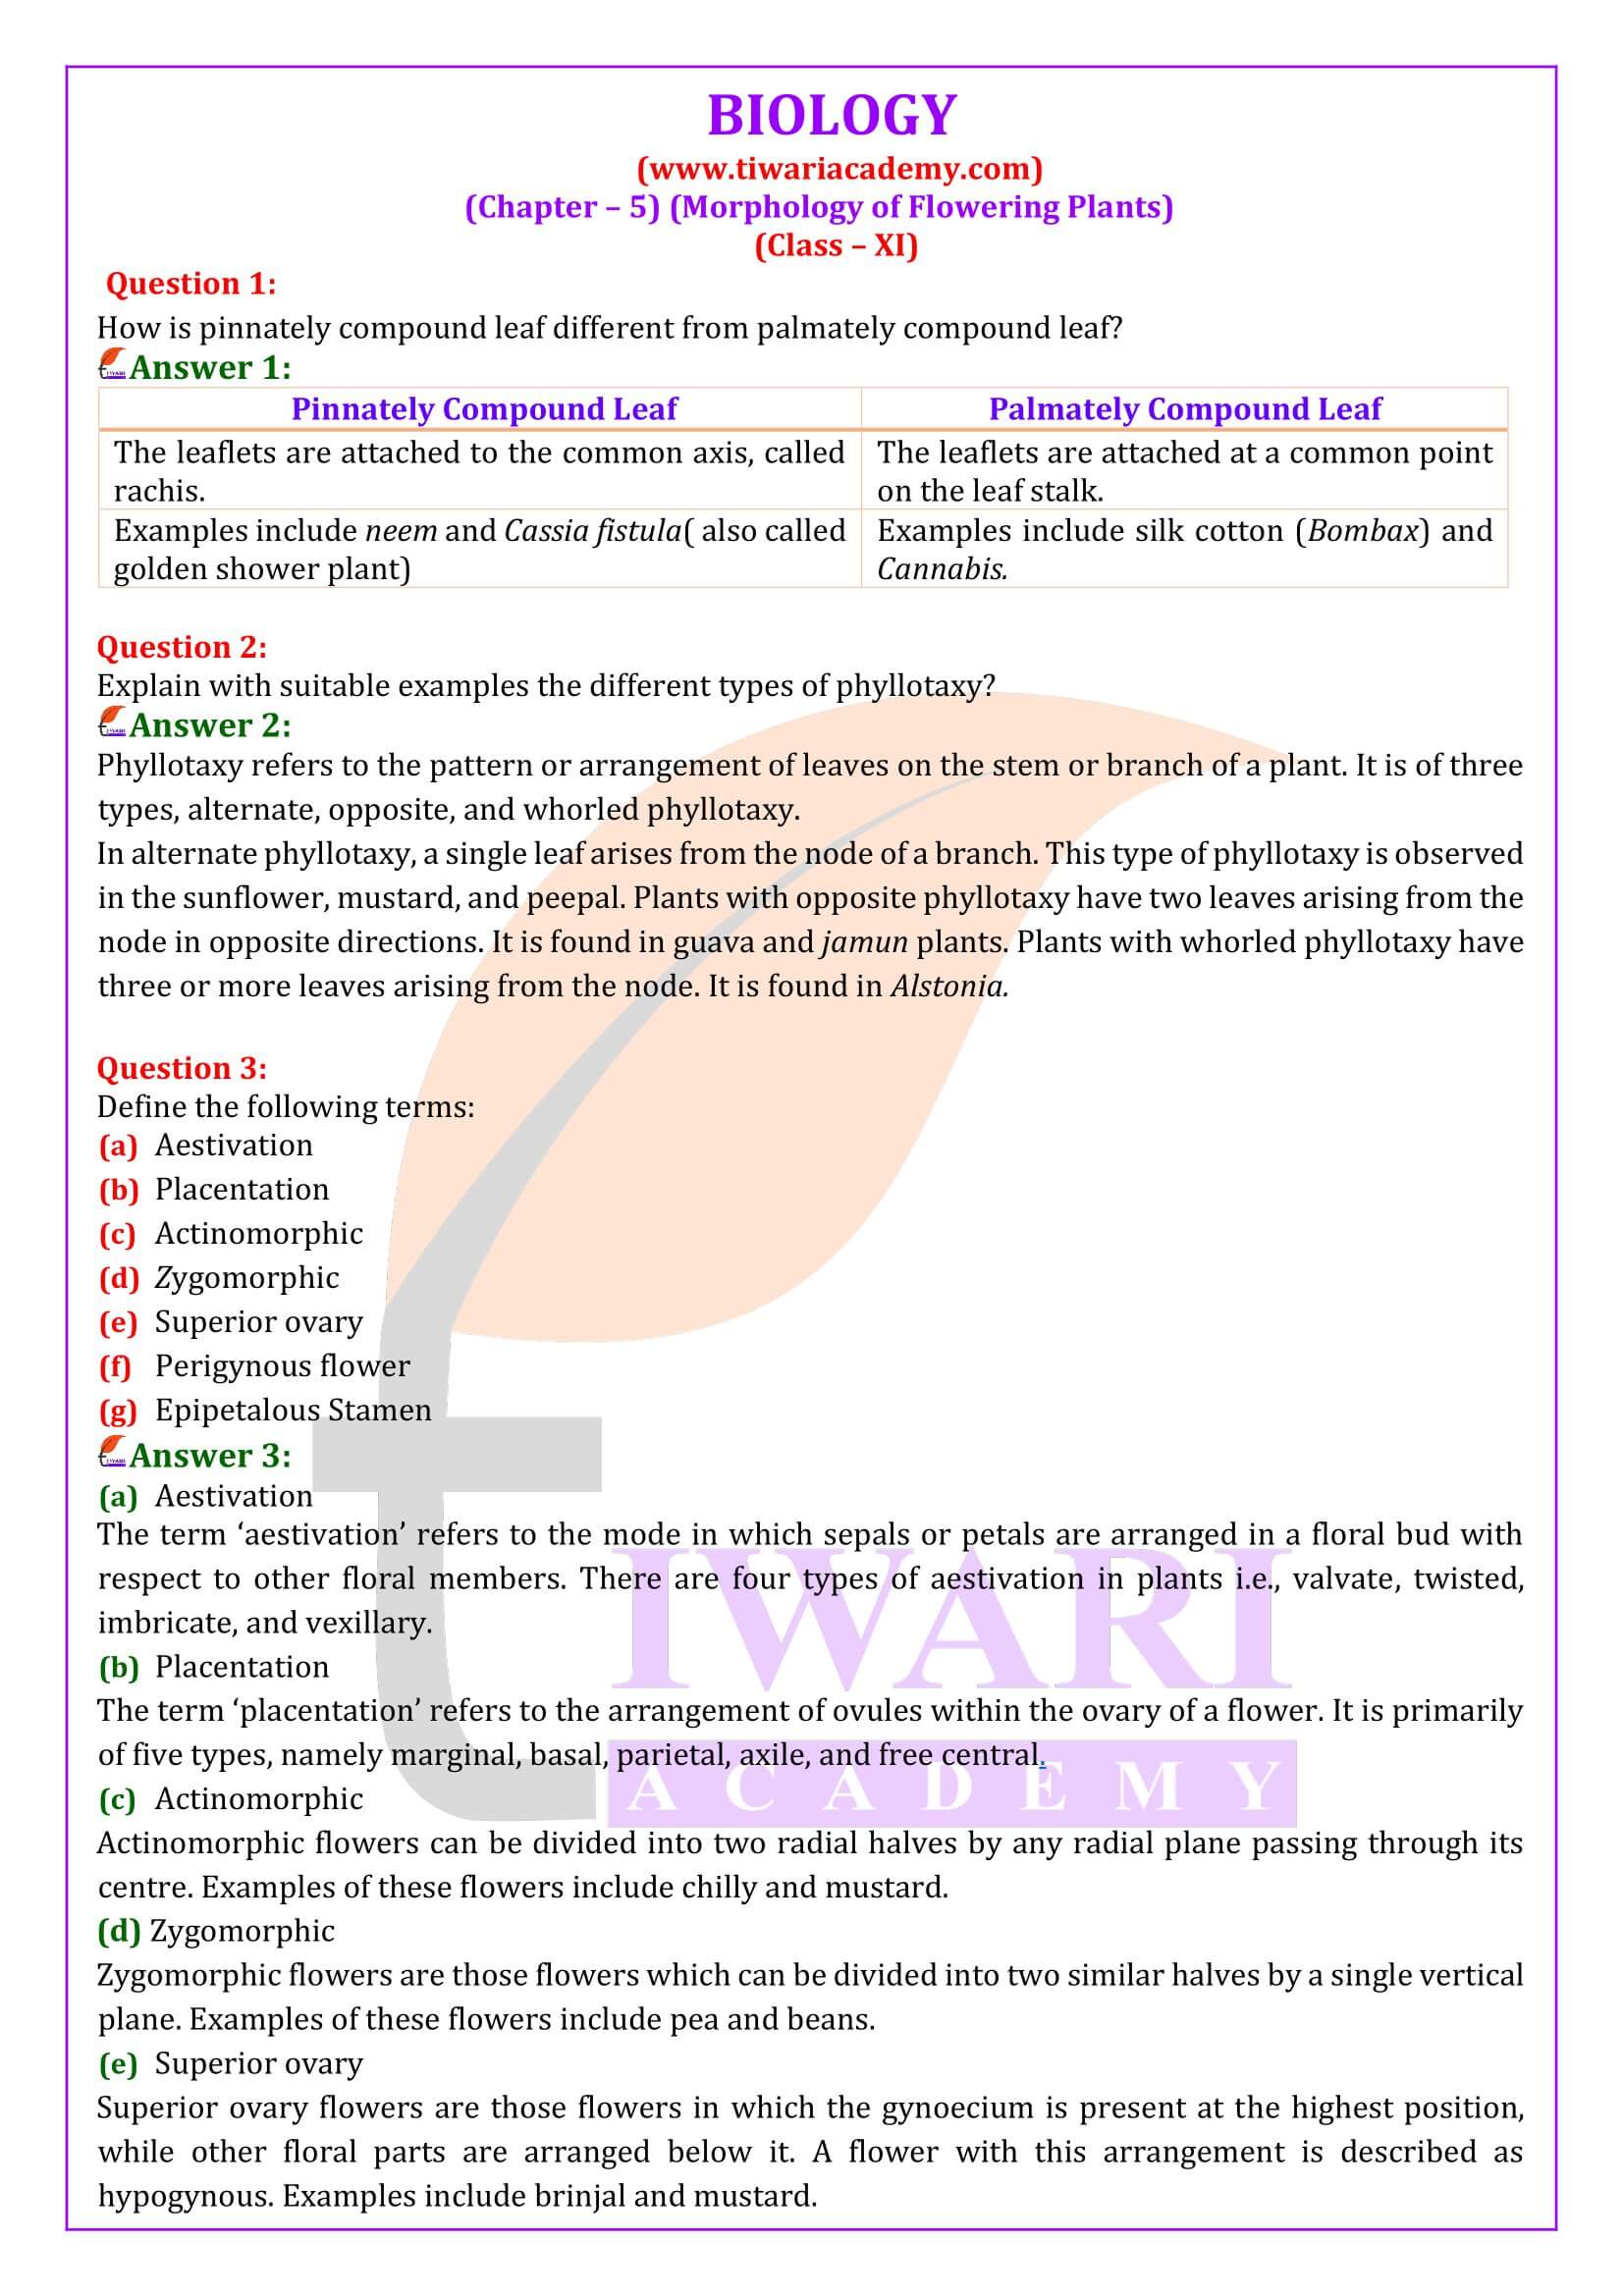 NCERT Solutions for Class 11 Biology Chapter 5 in English Medium